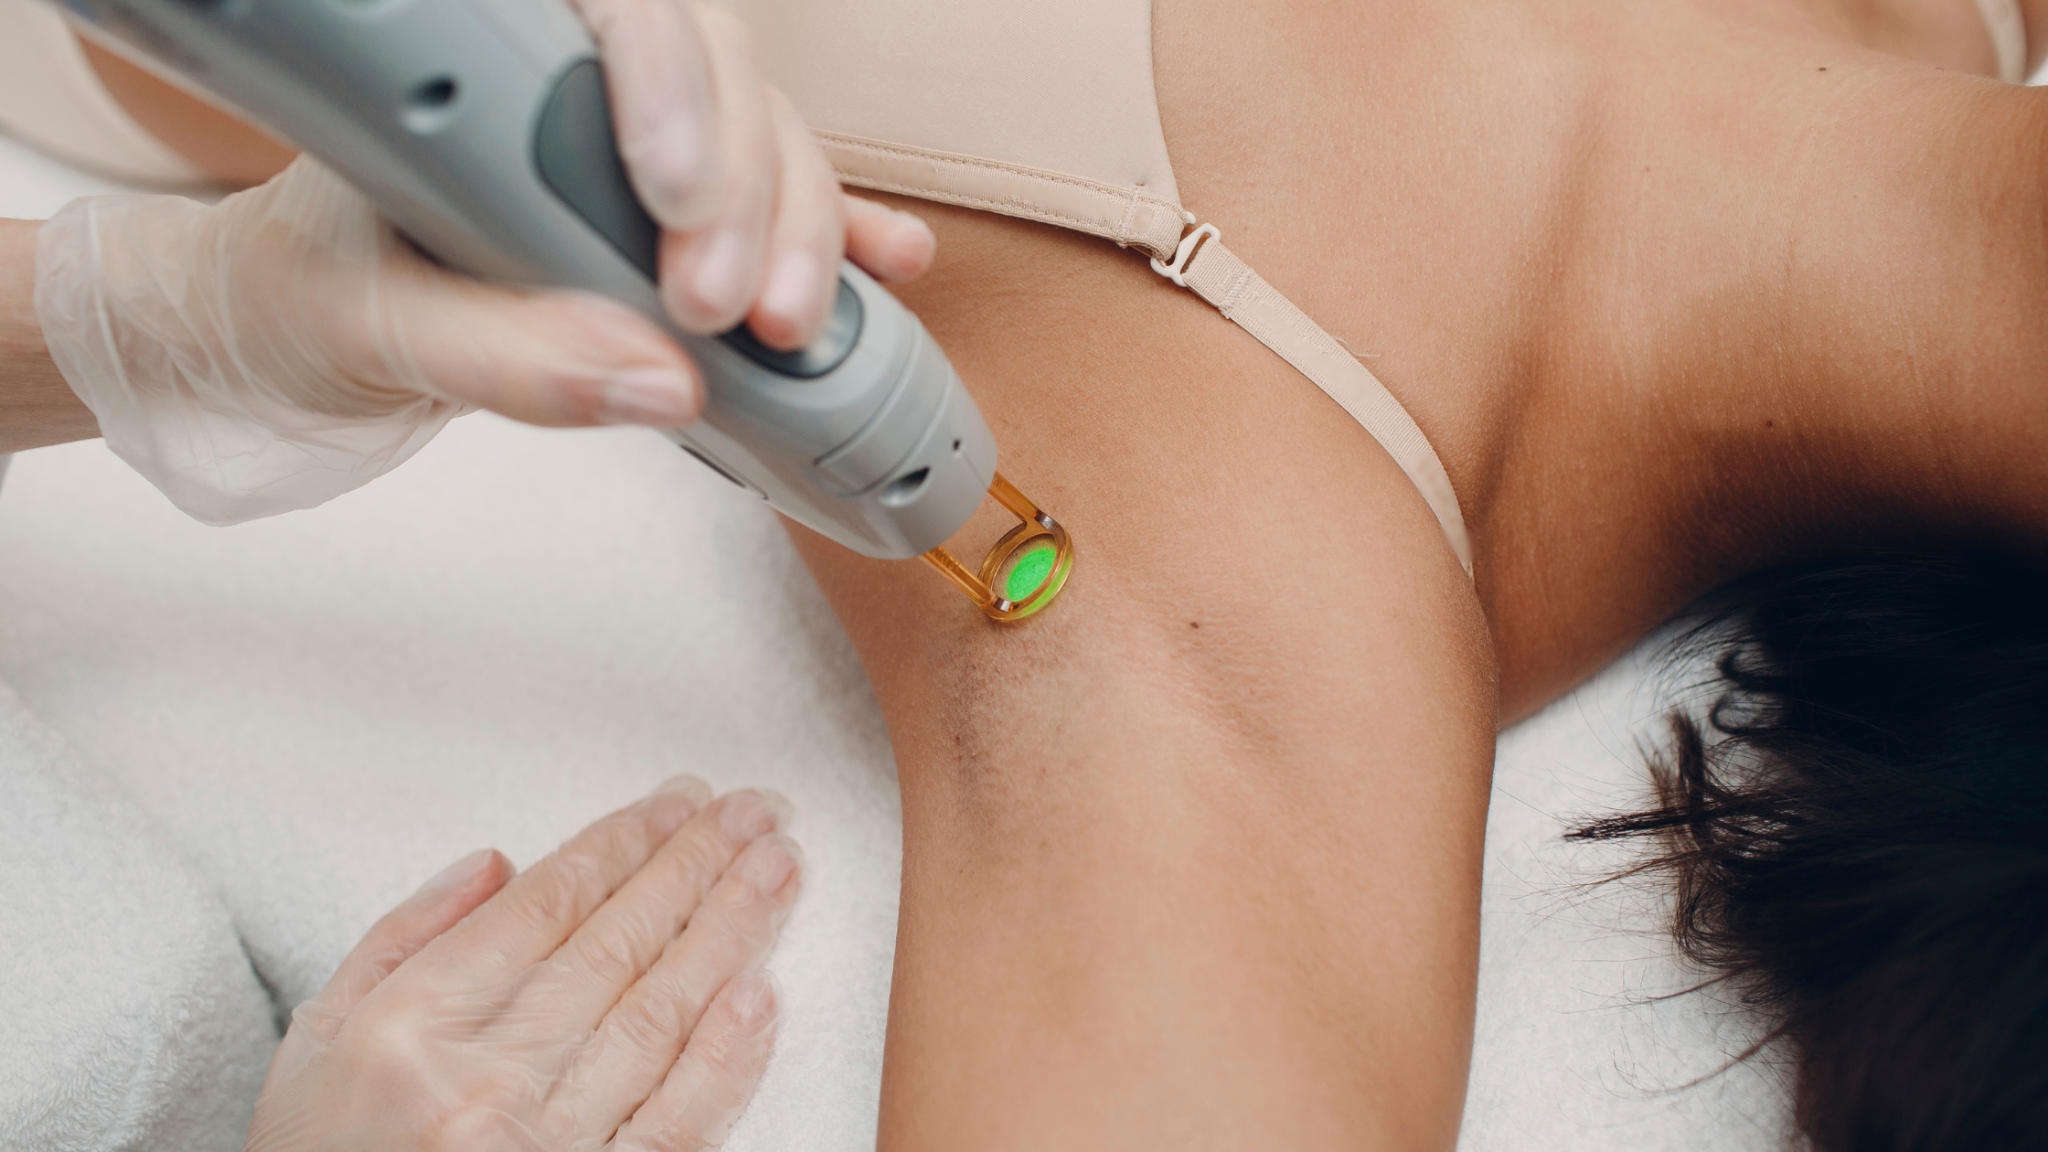 How Effective are Laser Hair Removal Treatments?